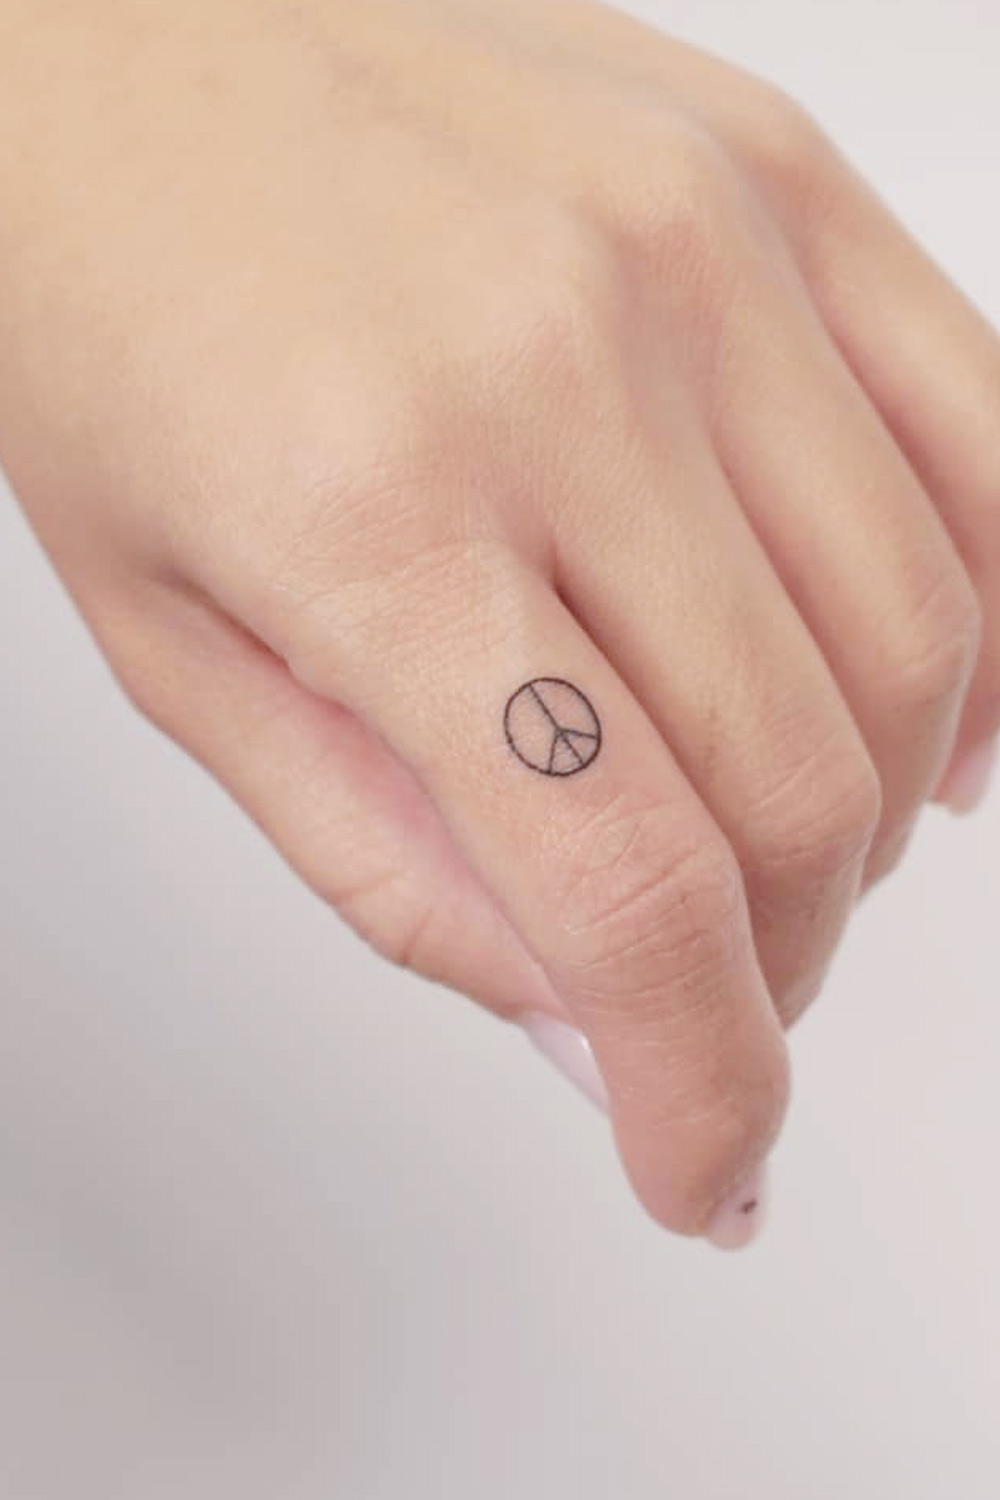 Buy Finger Tattoos Online In India - Etsy India